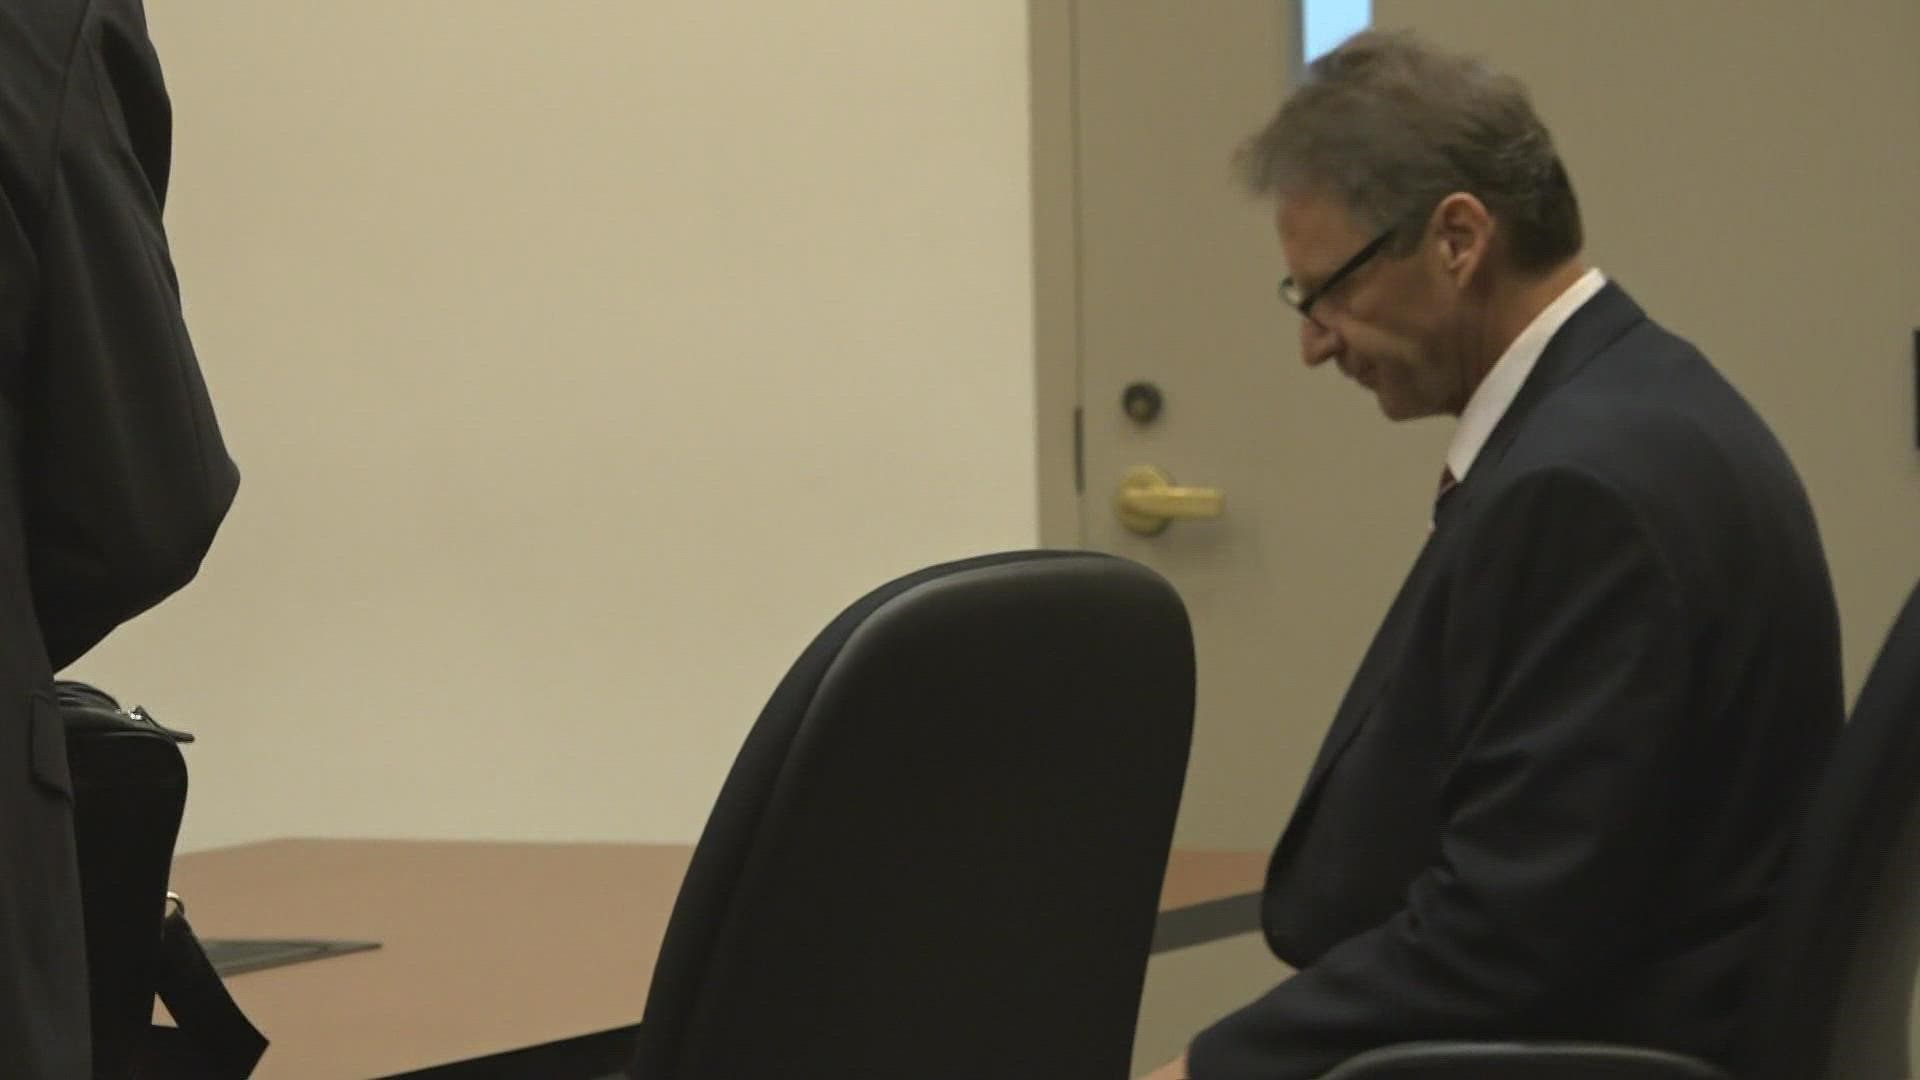 Frisbie plans to enter a not guilty plea in writing.